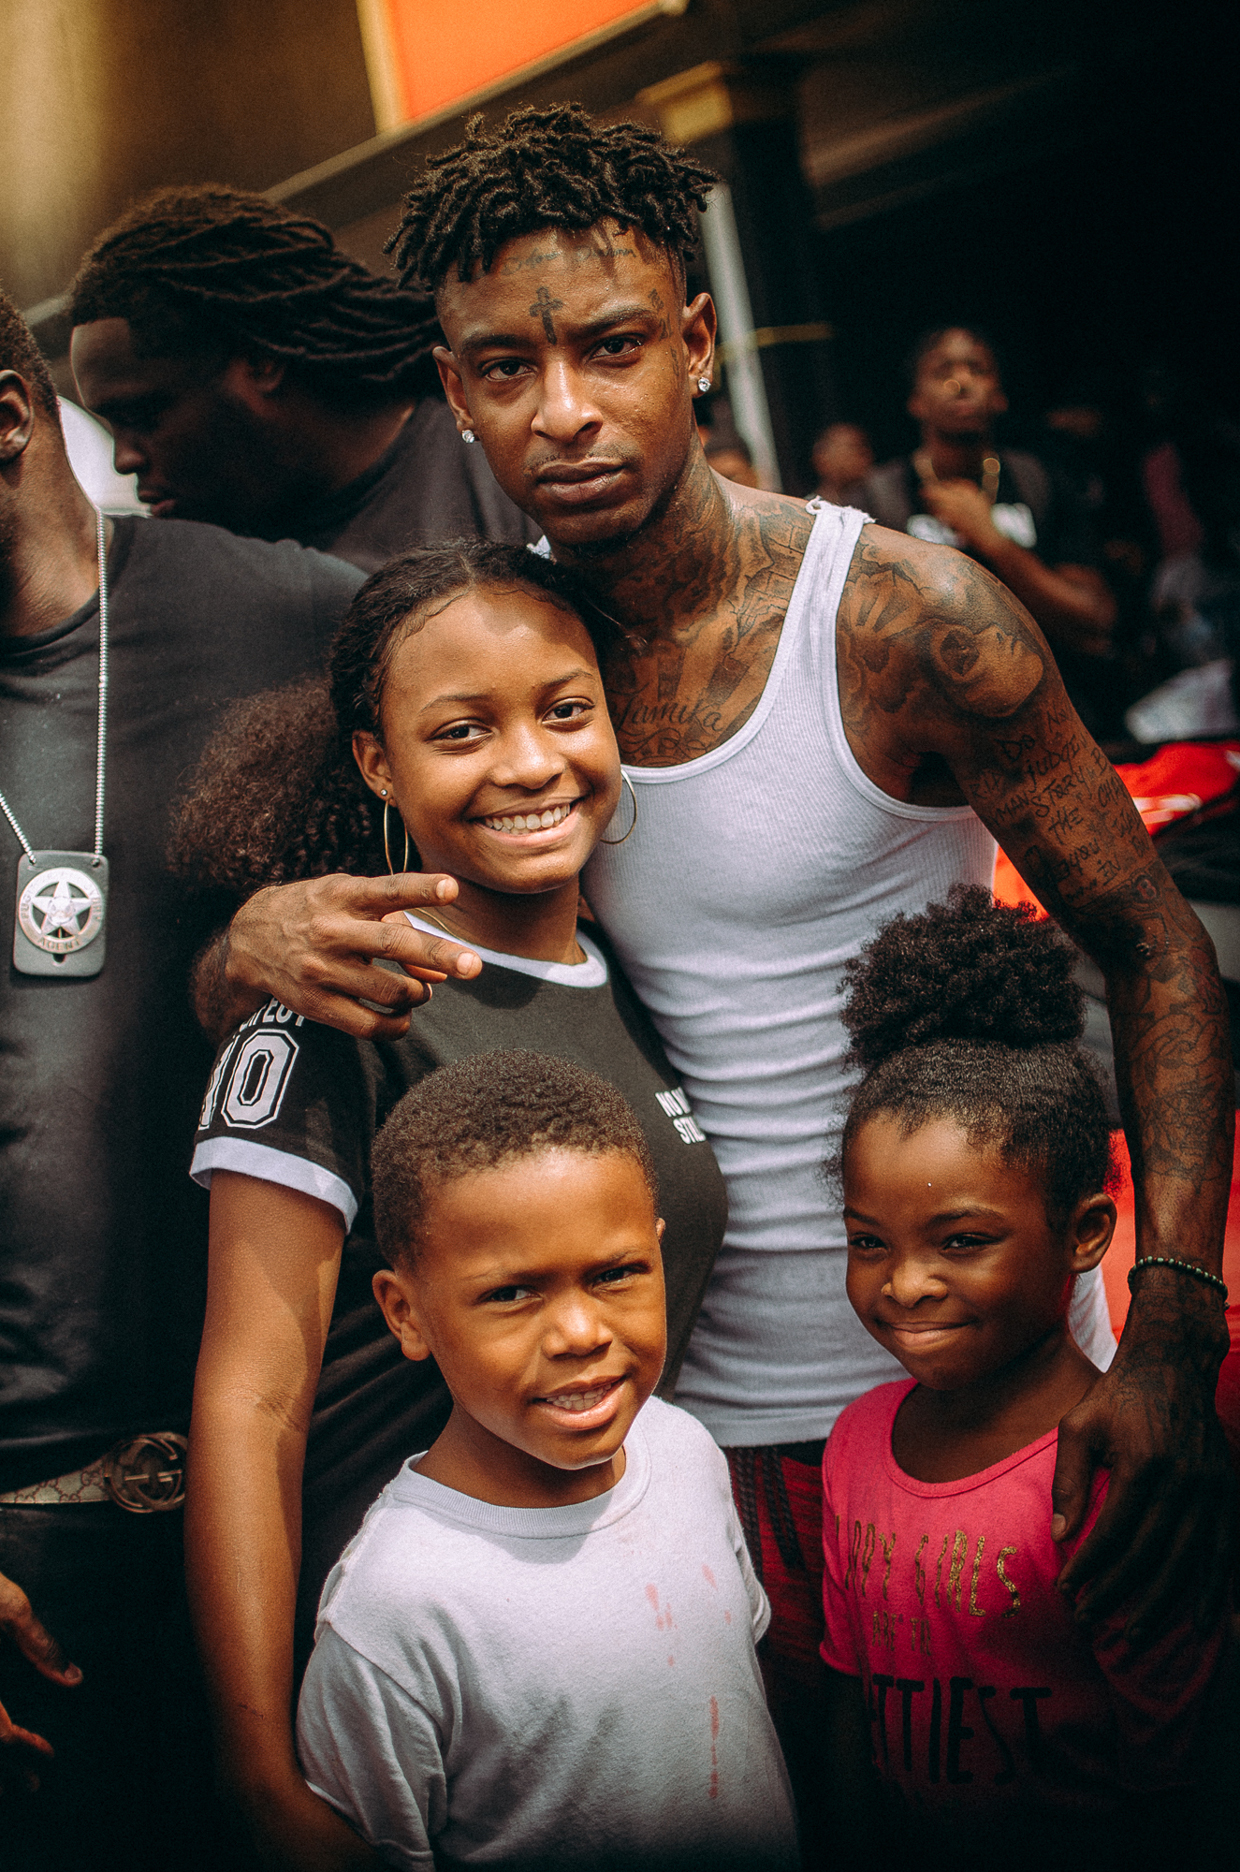 21 Savage To Host Third Annual Issa Back To School Drive Event